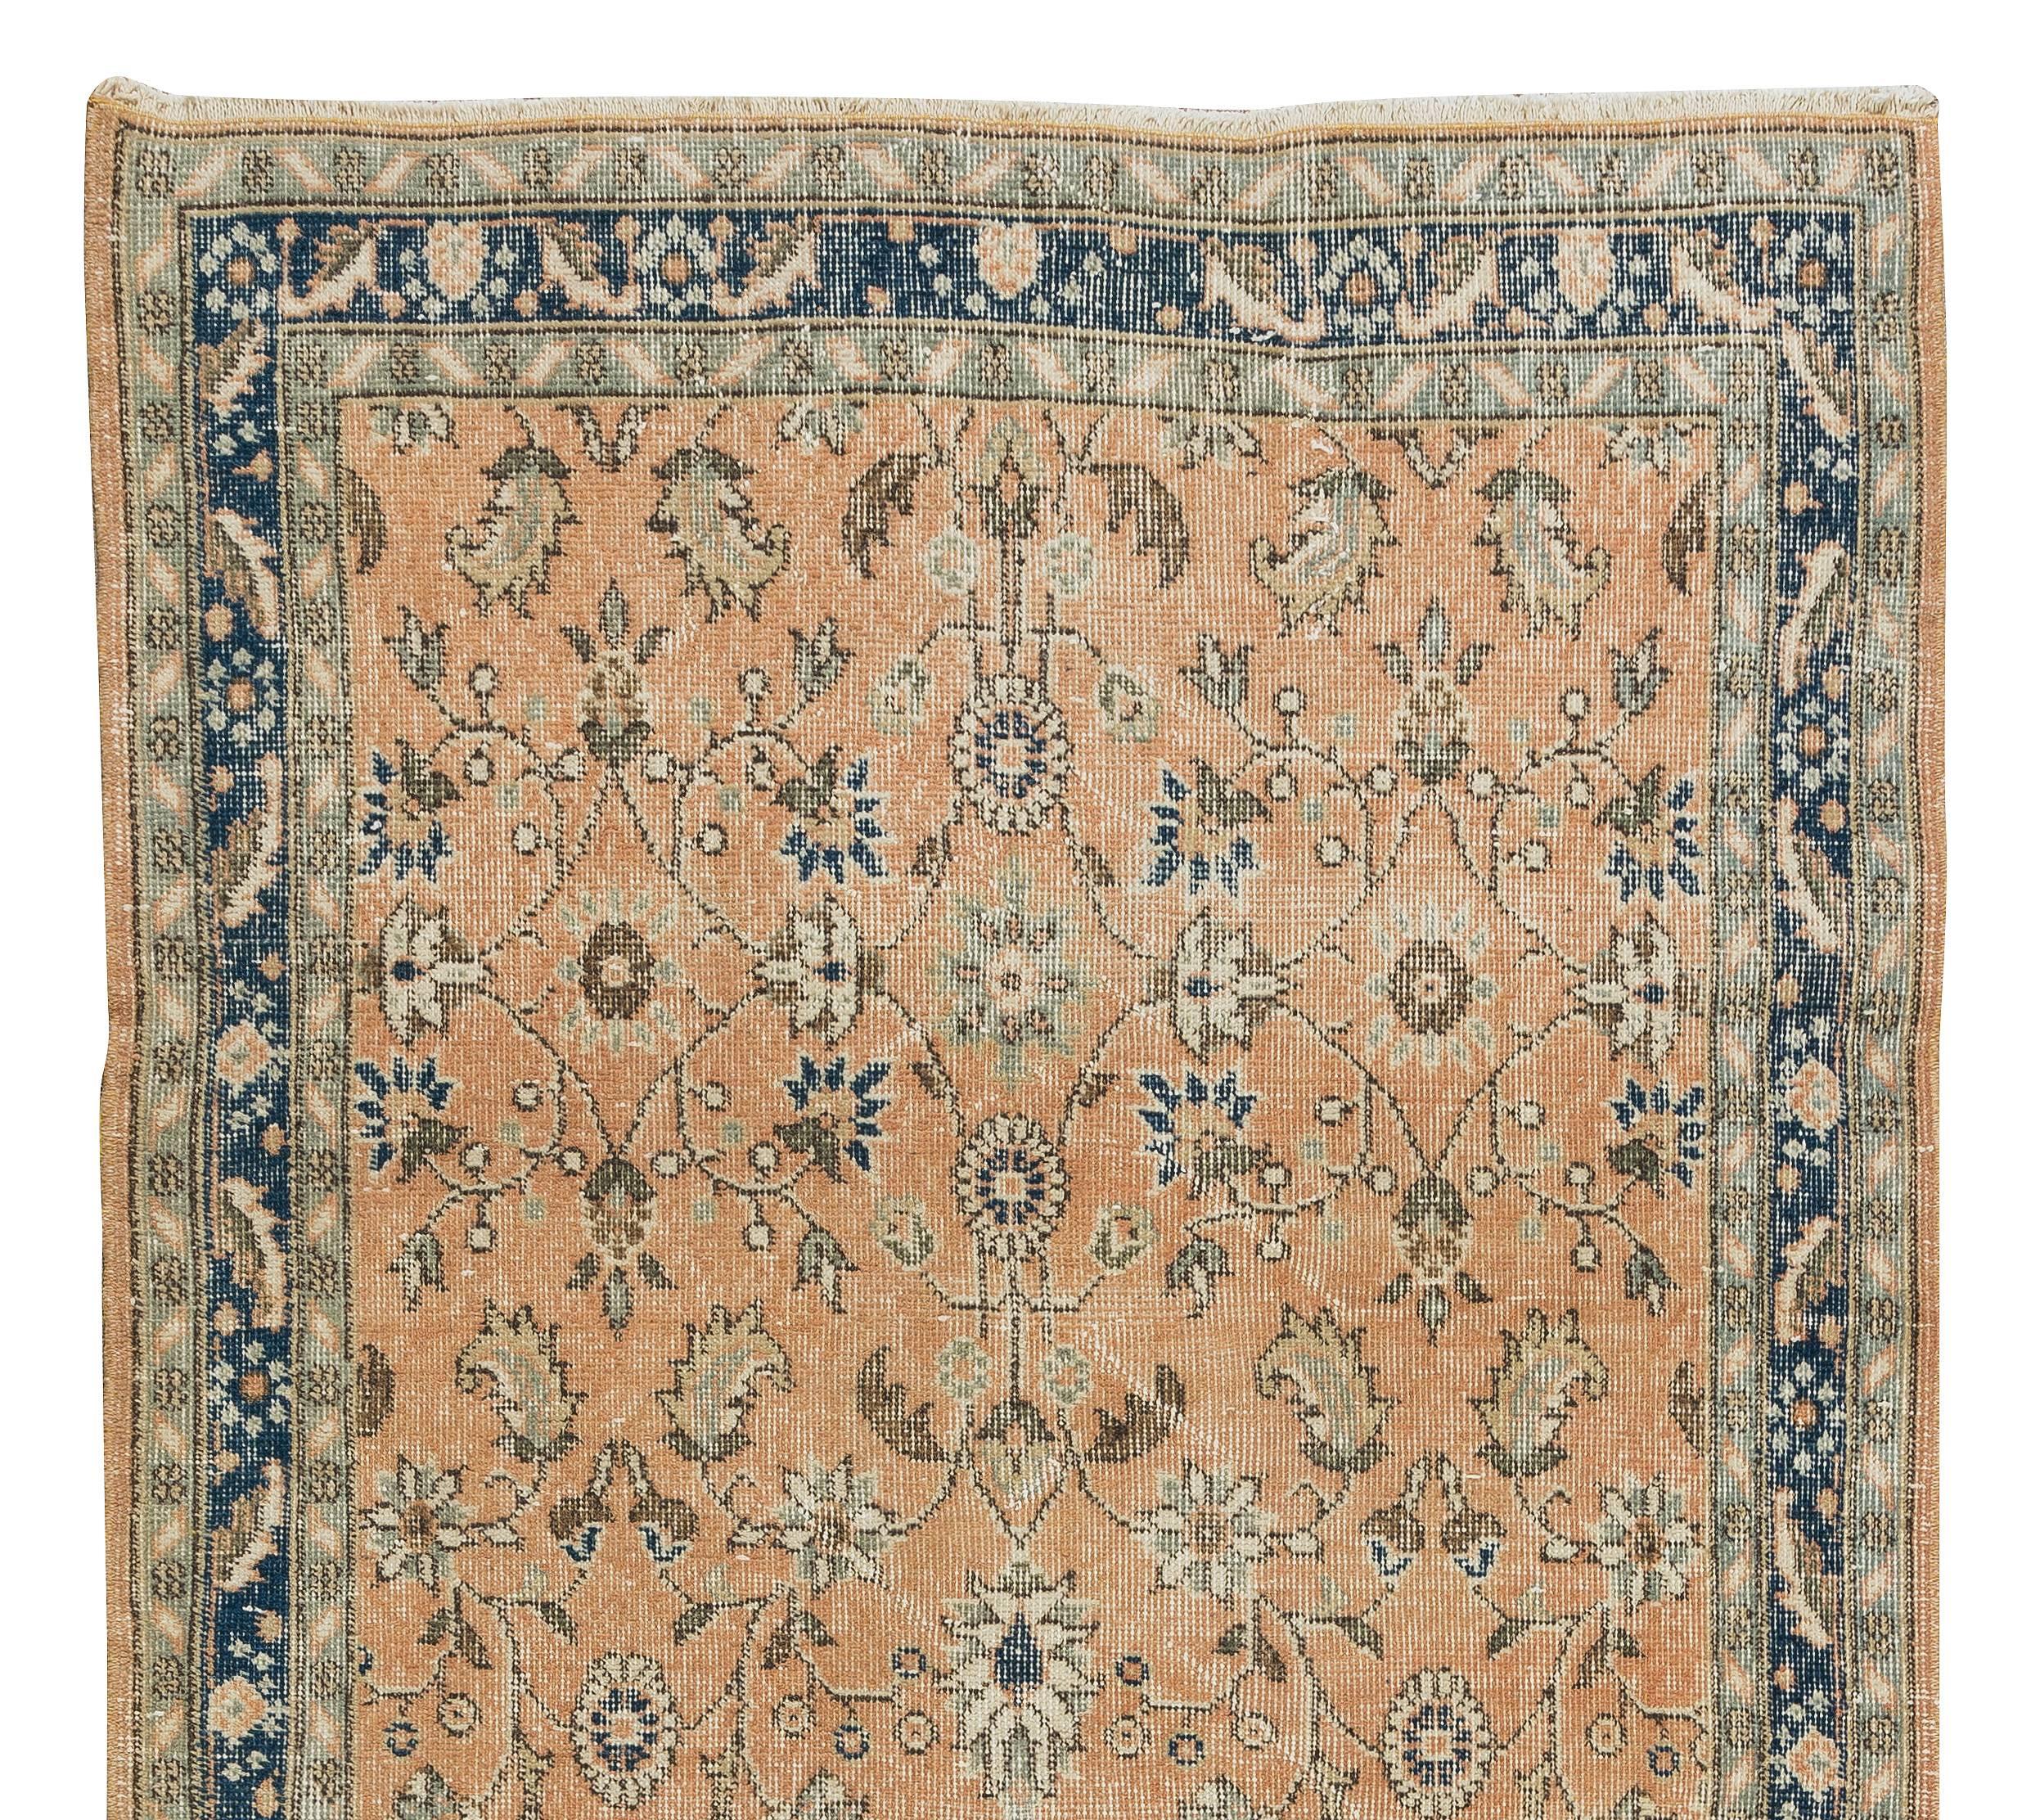 Hand-Woven Handmade Floral Pattern Turkish Rug, Authentic Vintage Wool Carpet For Sale